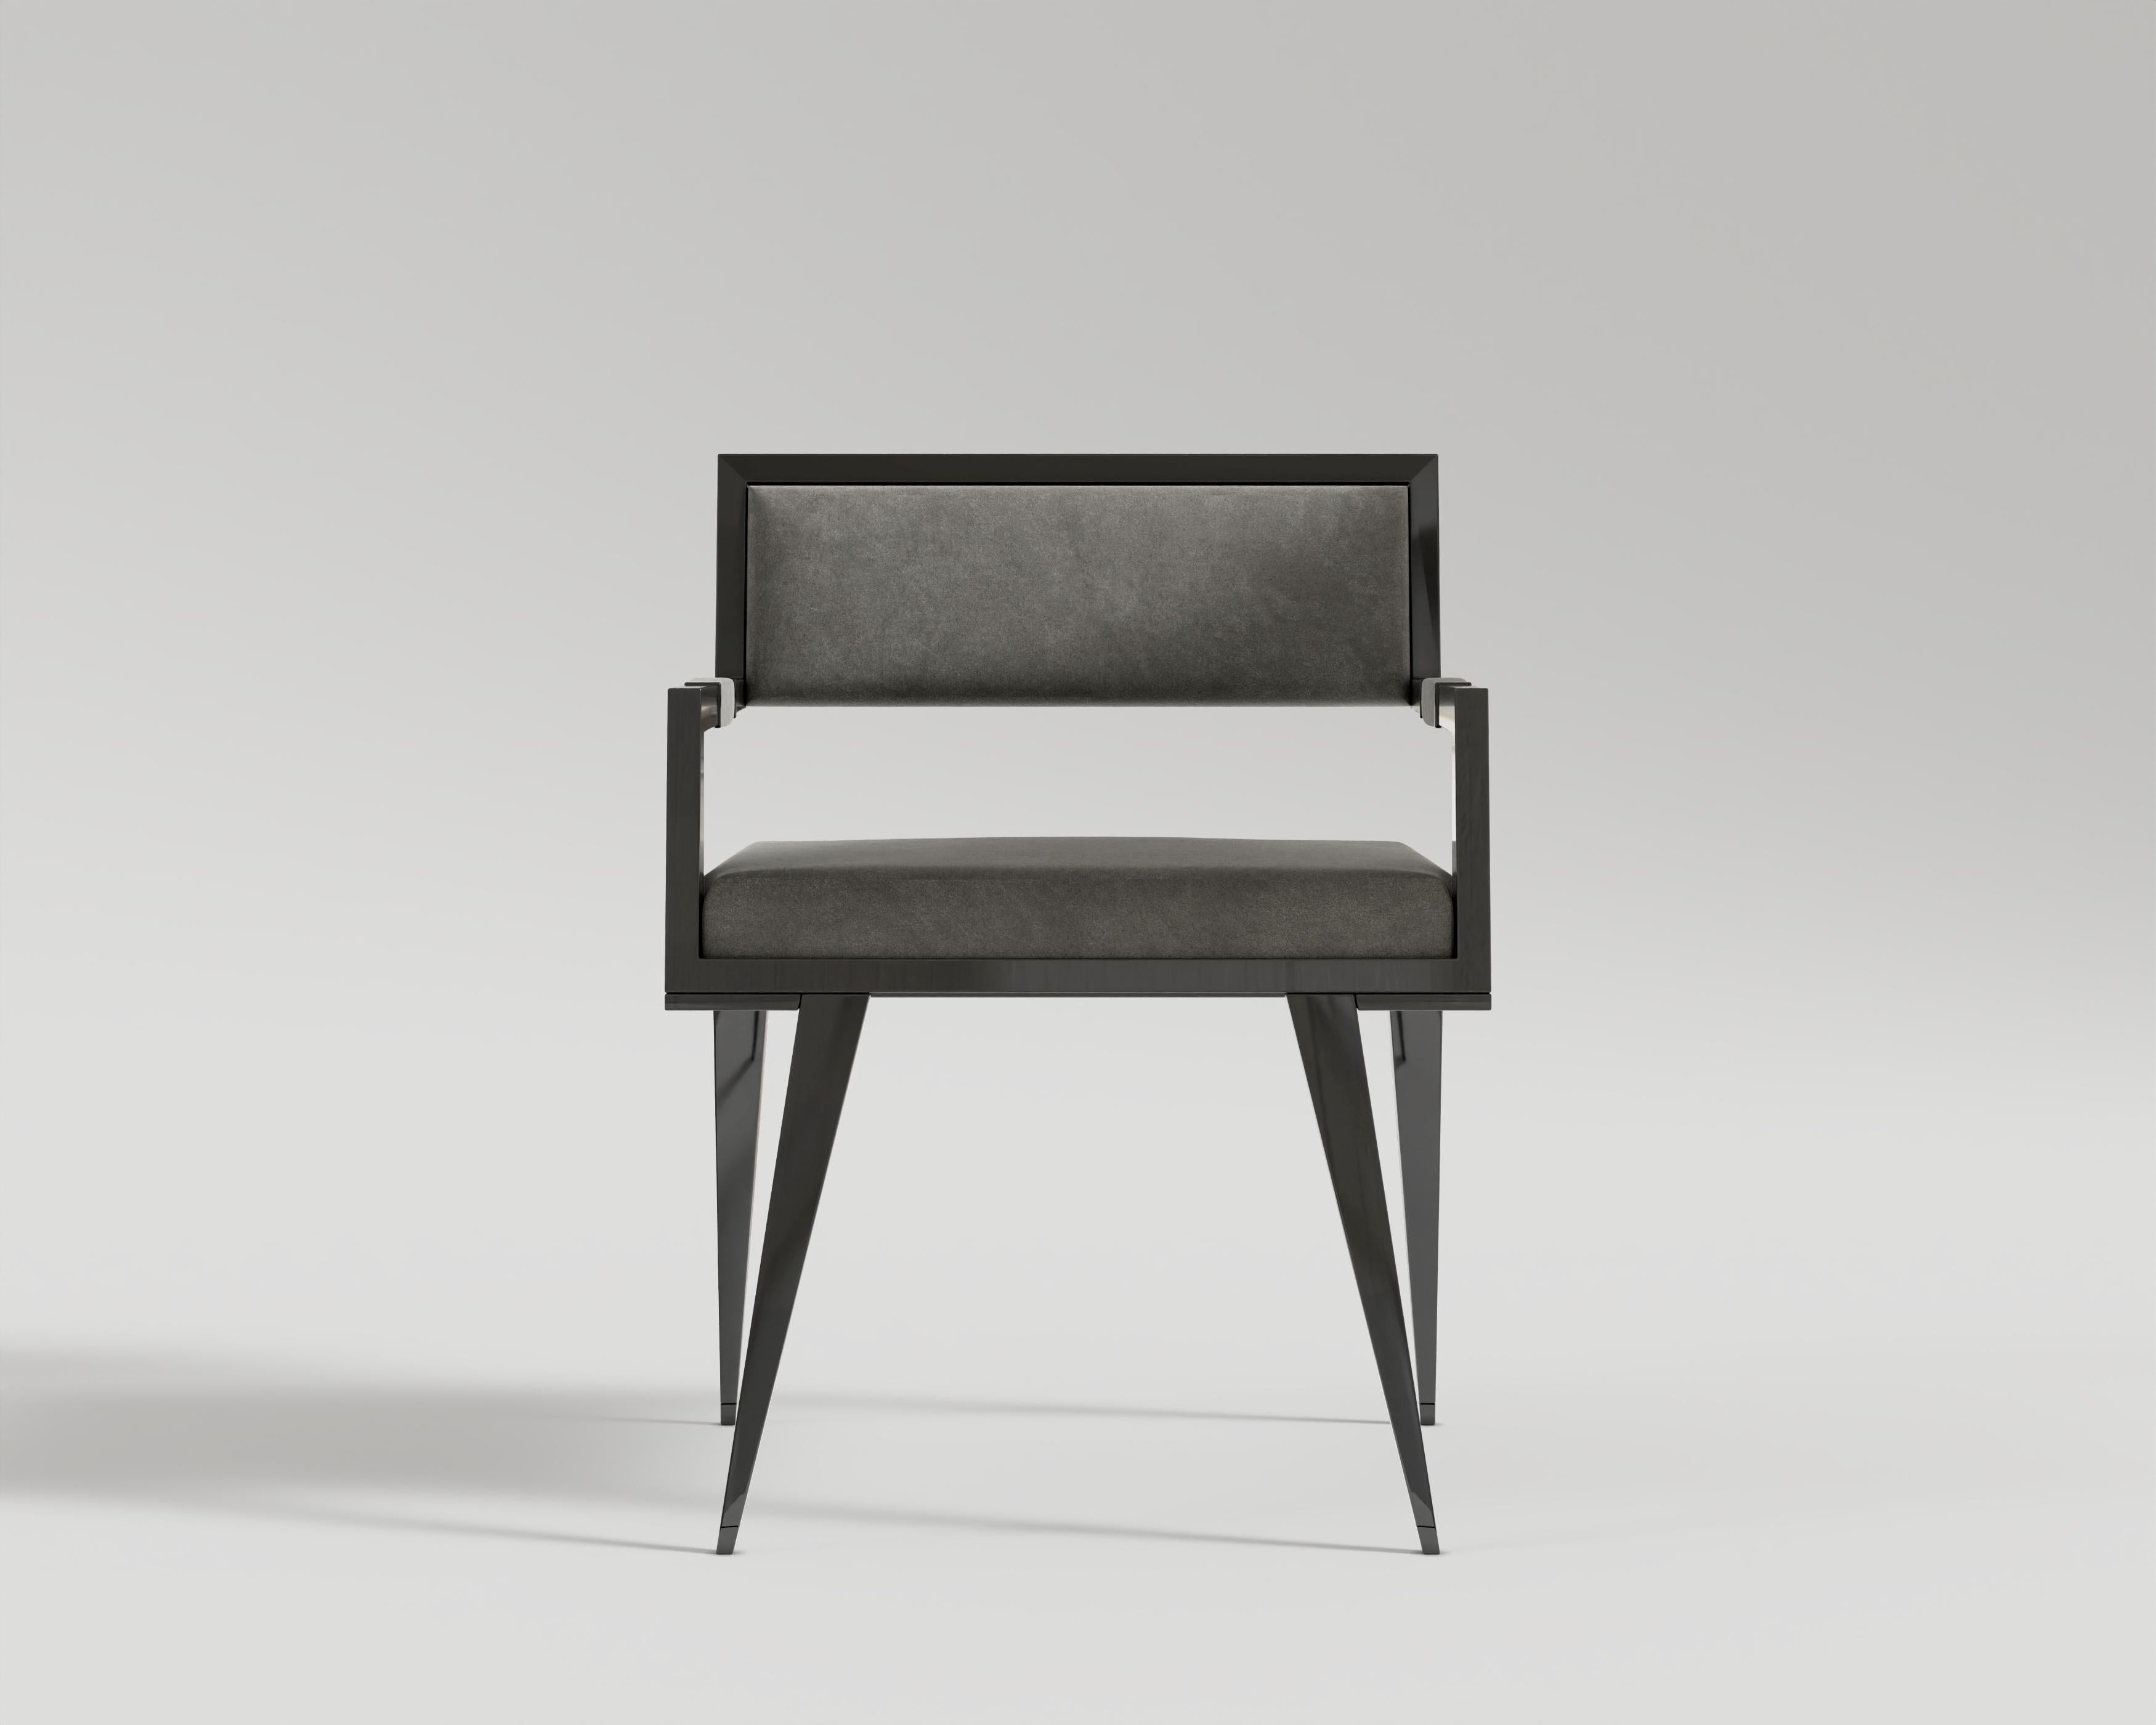 Le Loup Chair
Introducing the Le Loup Dining Chair: timeless design with contemporary comfort. It is available in two striking finishes: the all-black lacquer metal frame for those who like it simple yet very elegant, and the one with added patine